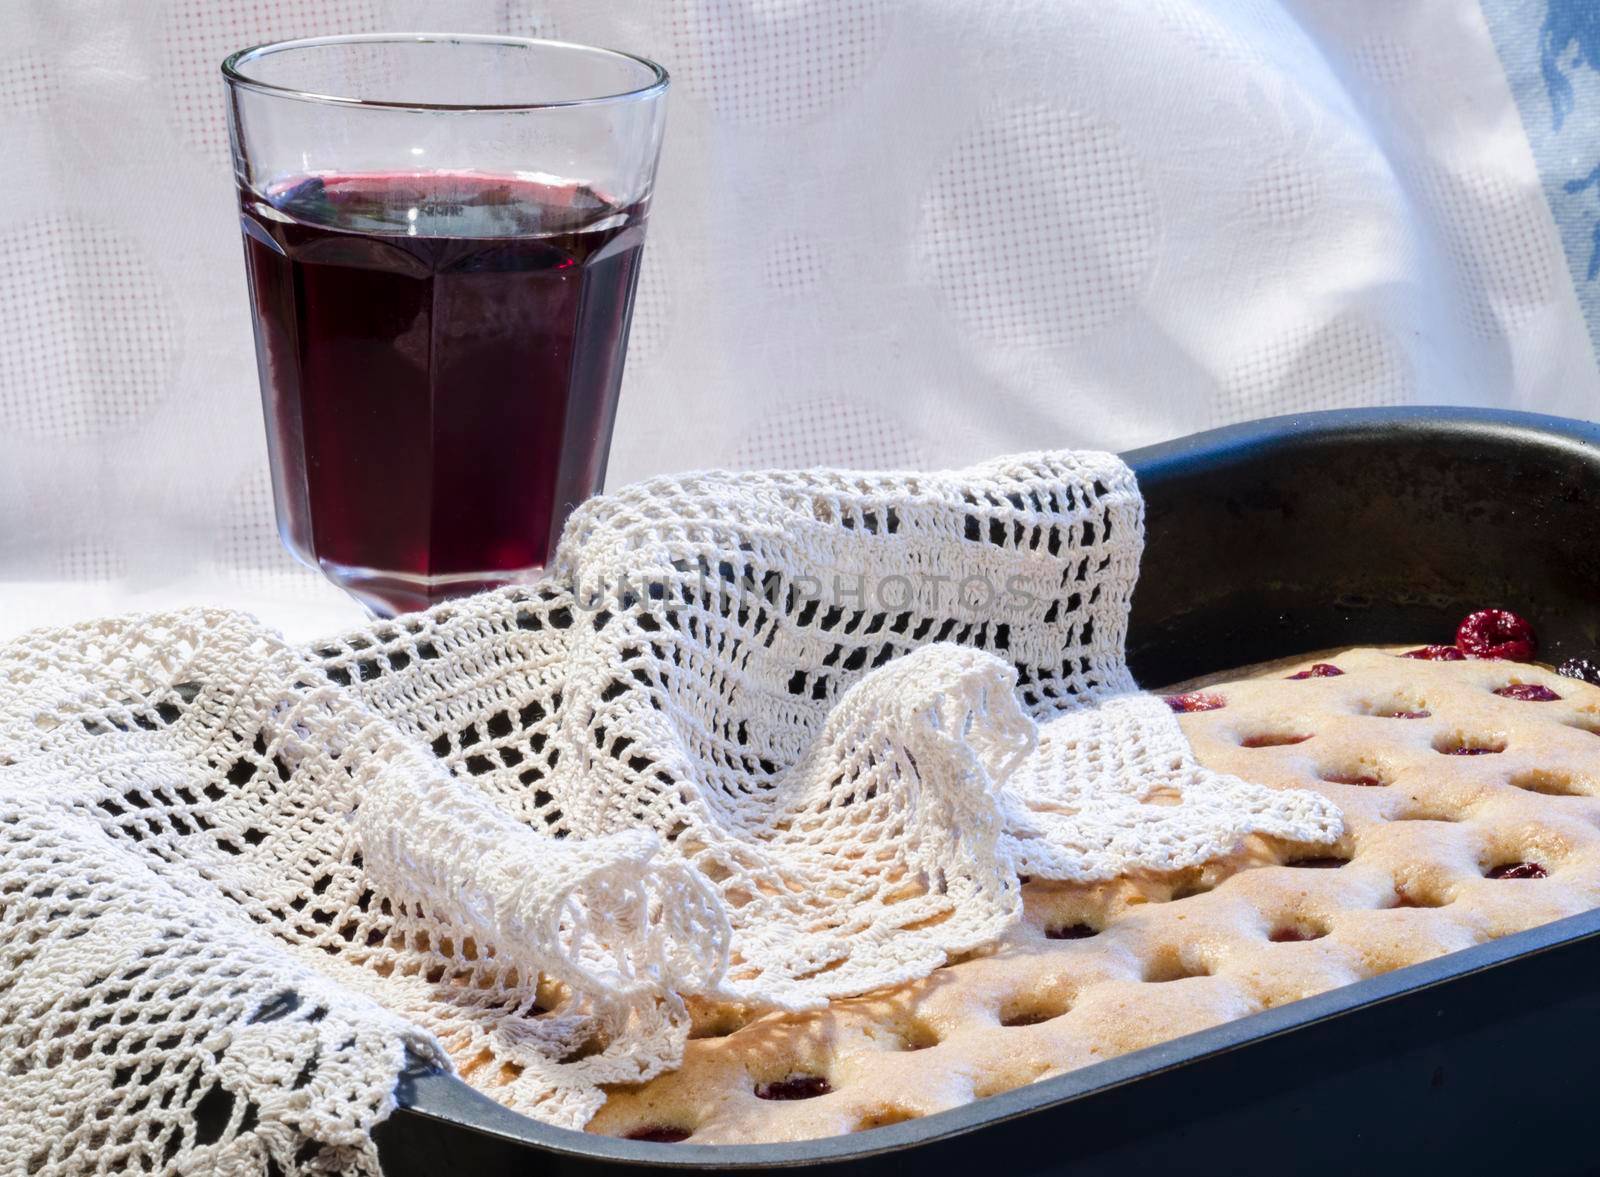 Homemade cherry pie with a knitted cloth. From the series "Homemade Cherry Pie"